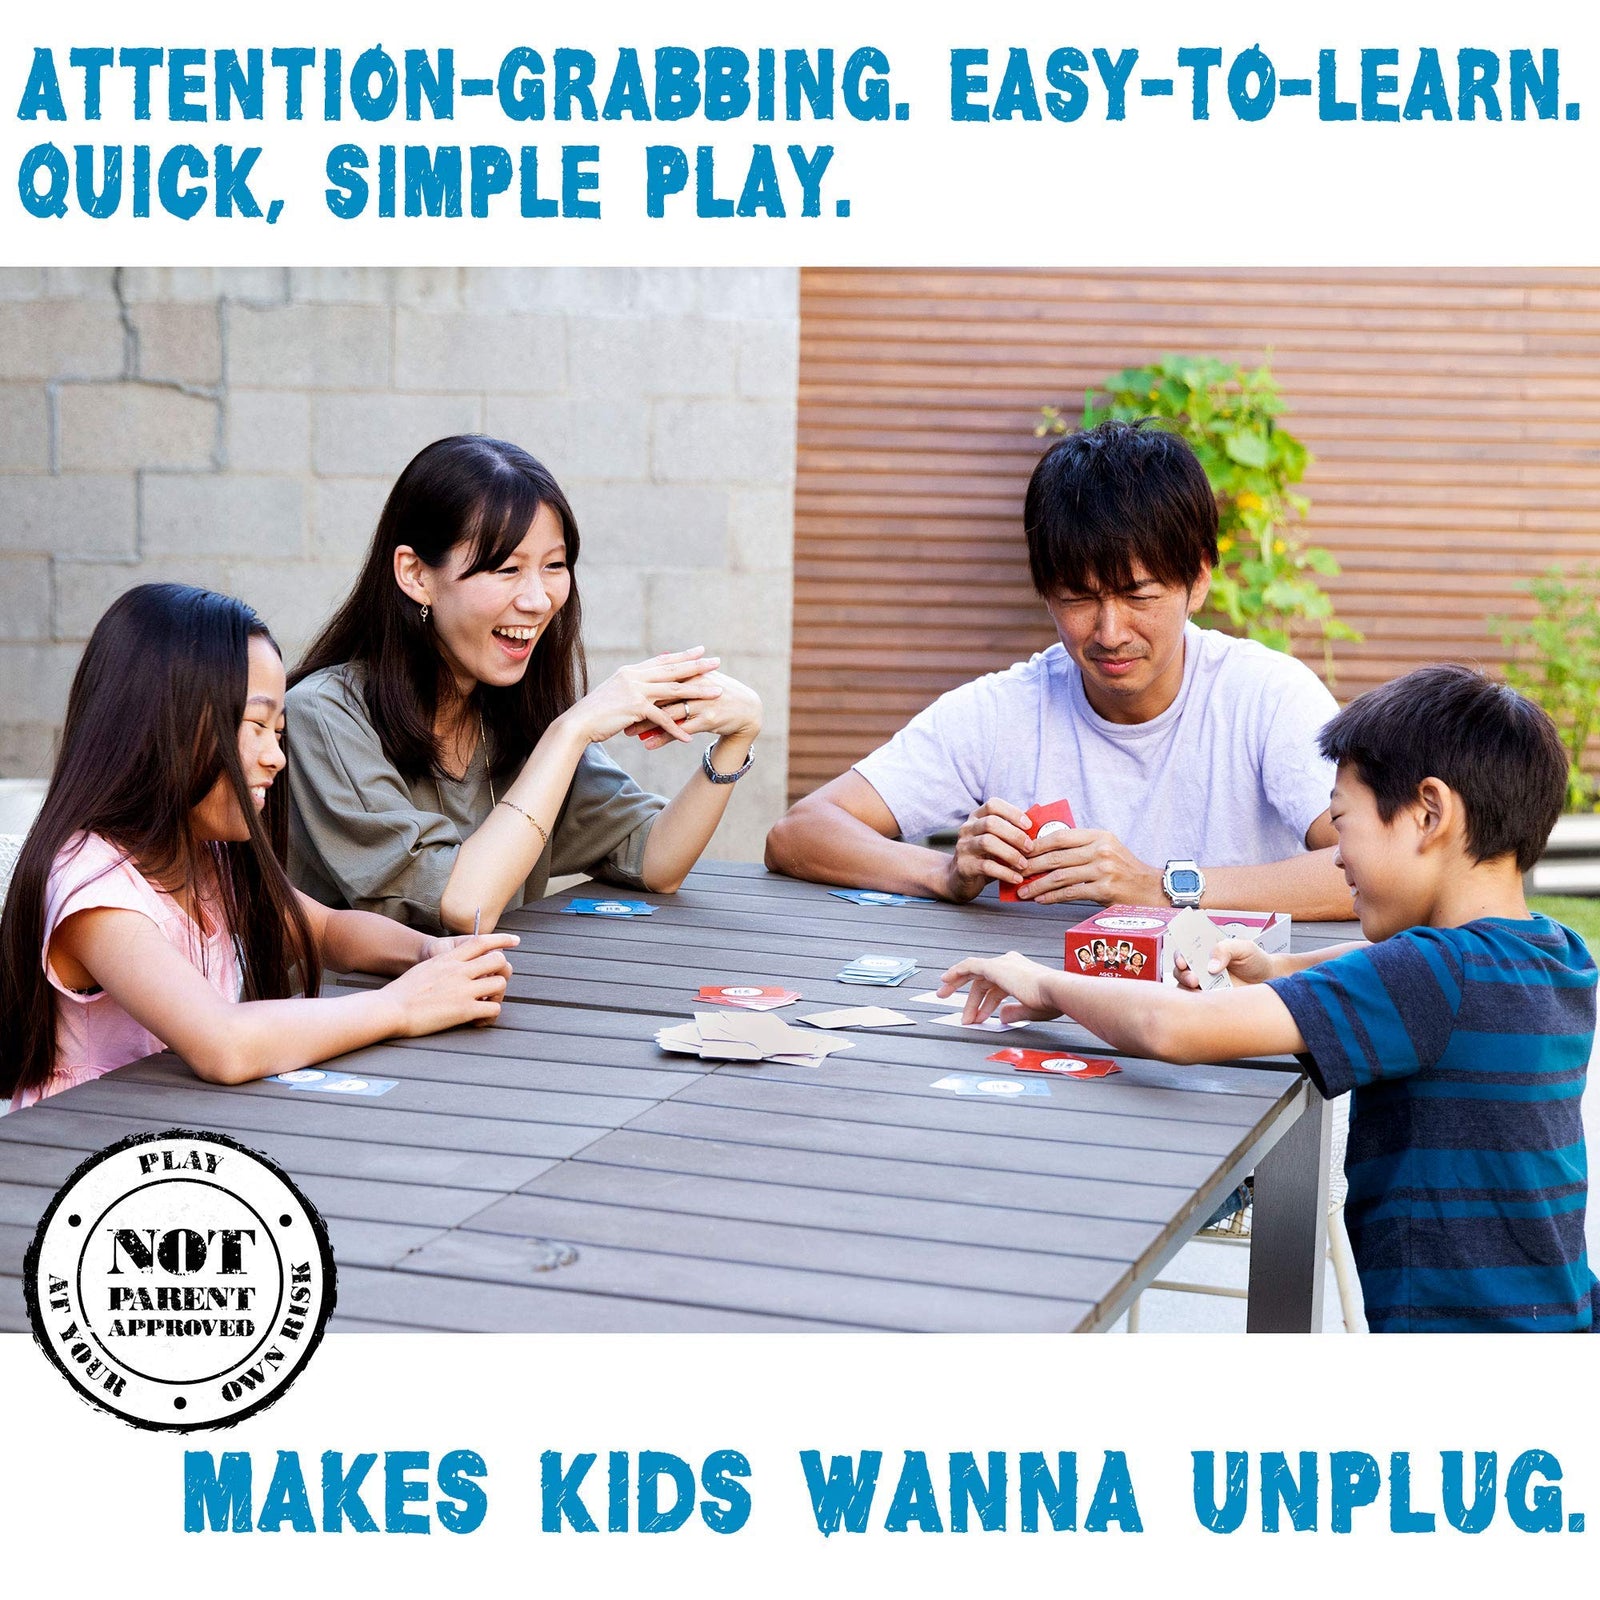 Not Parent Approved: A Fun Card Game and Gift for Kids 8-12, Tweens, Teens, Families and Mischief Makers – The Original, Hilarious Family Party Game